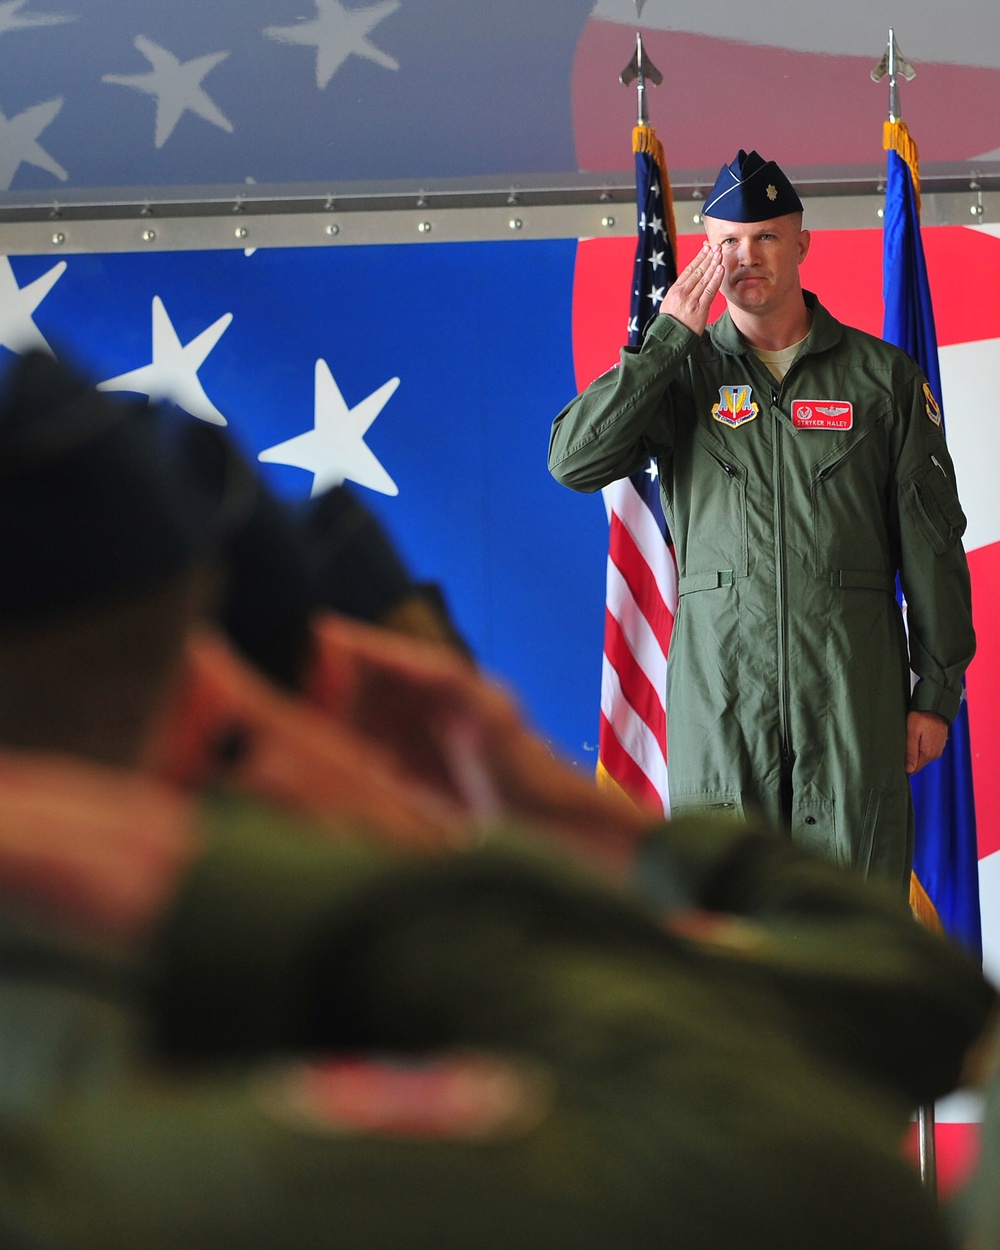 Haley accepts command of the 333rd FS